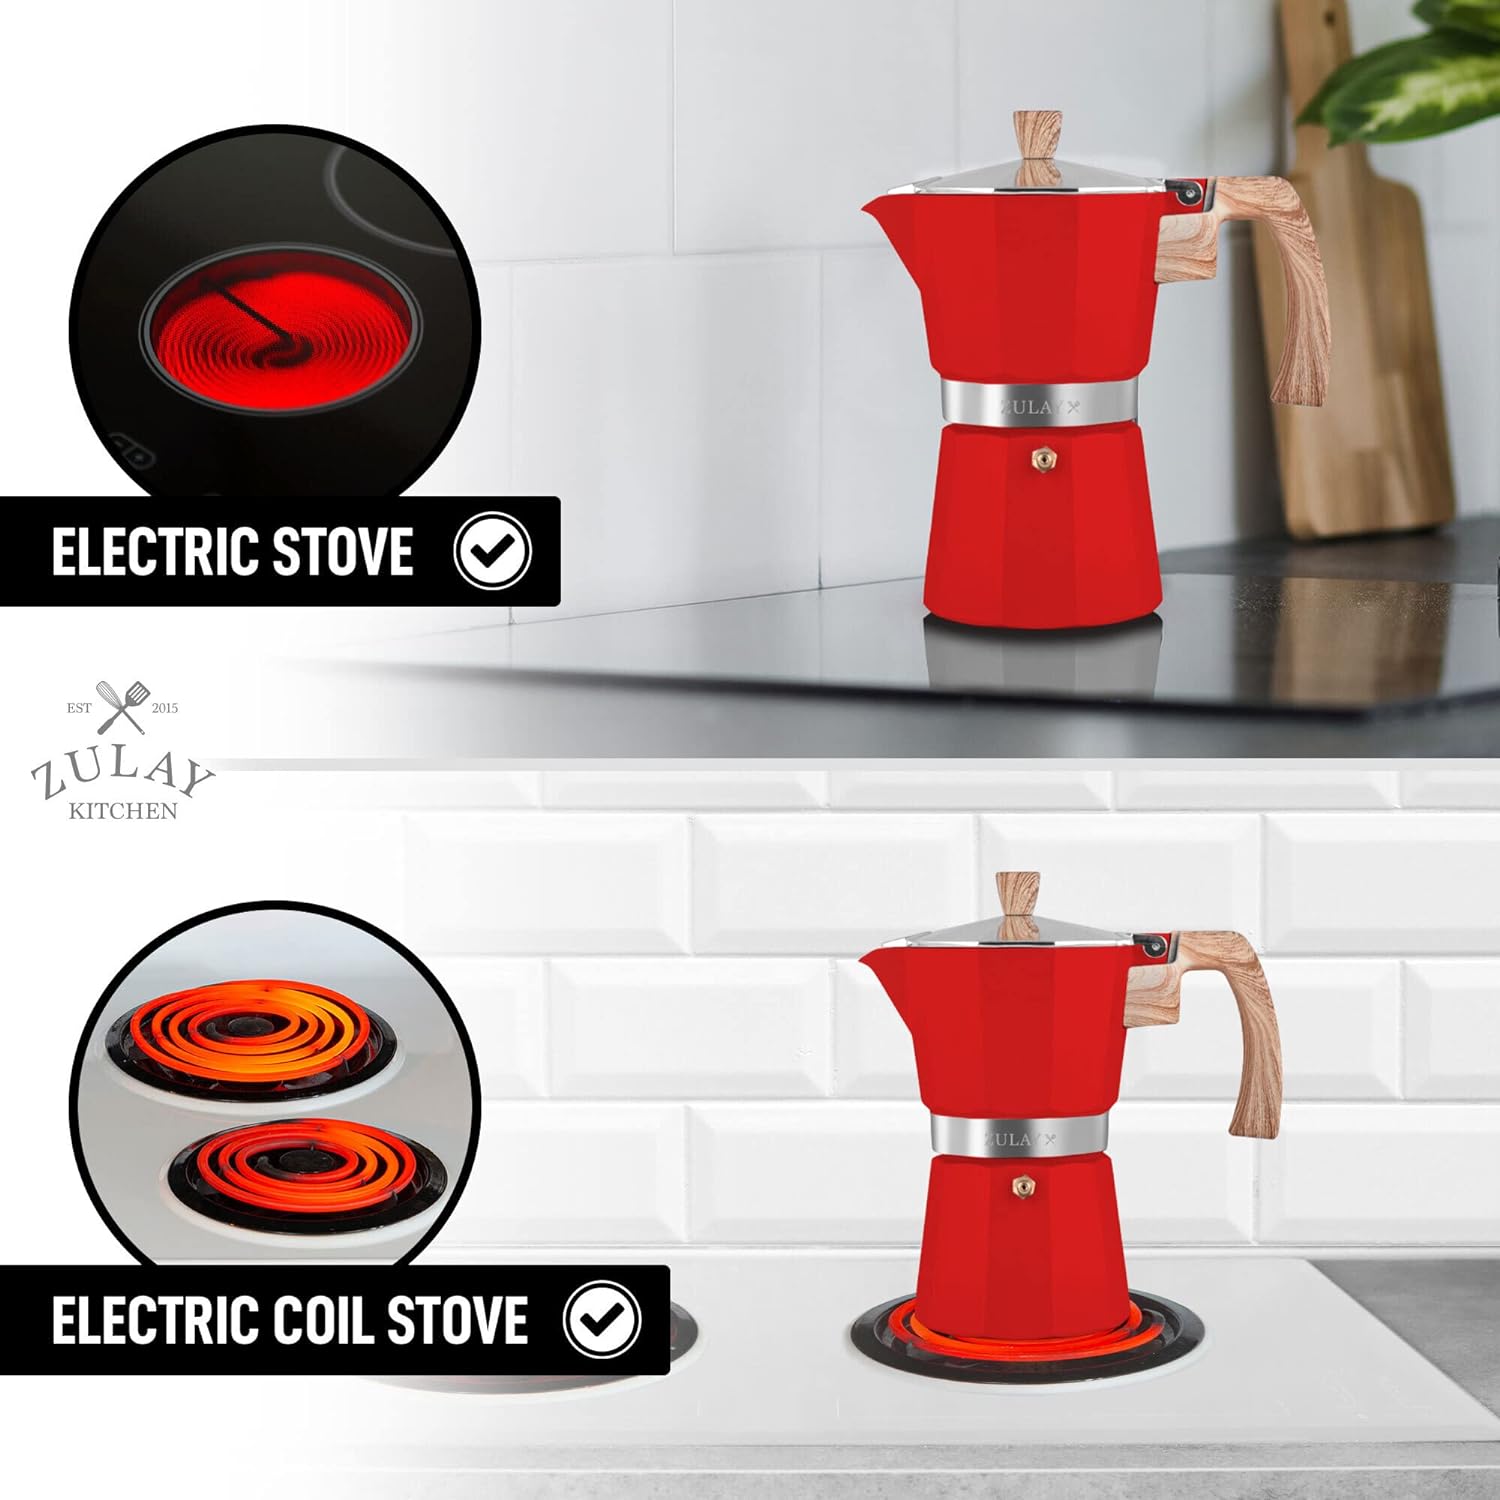 Stovetop Espresso Cup Moka Pot compatible with electric stove and electric coil stove